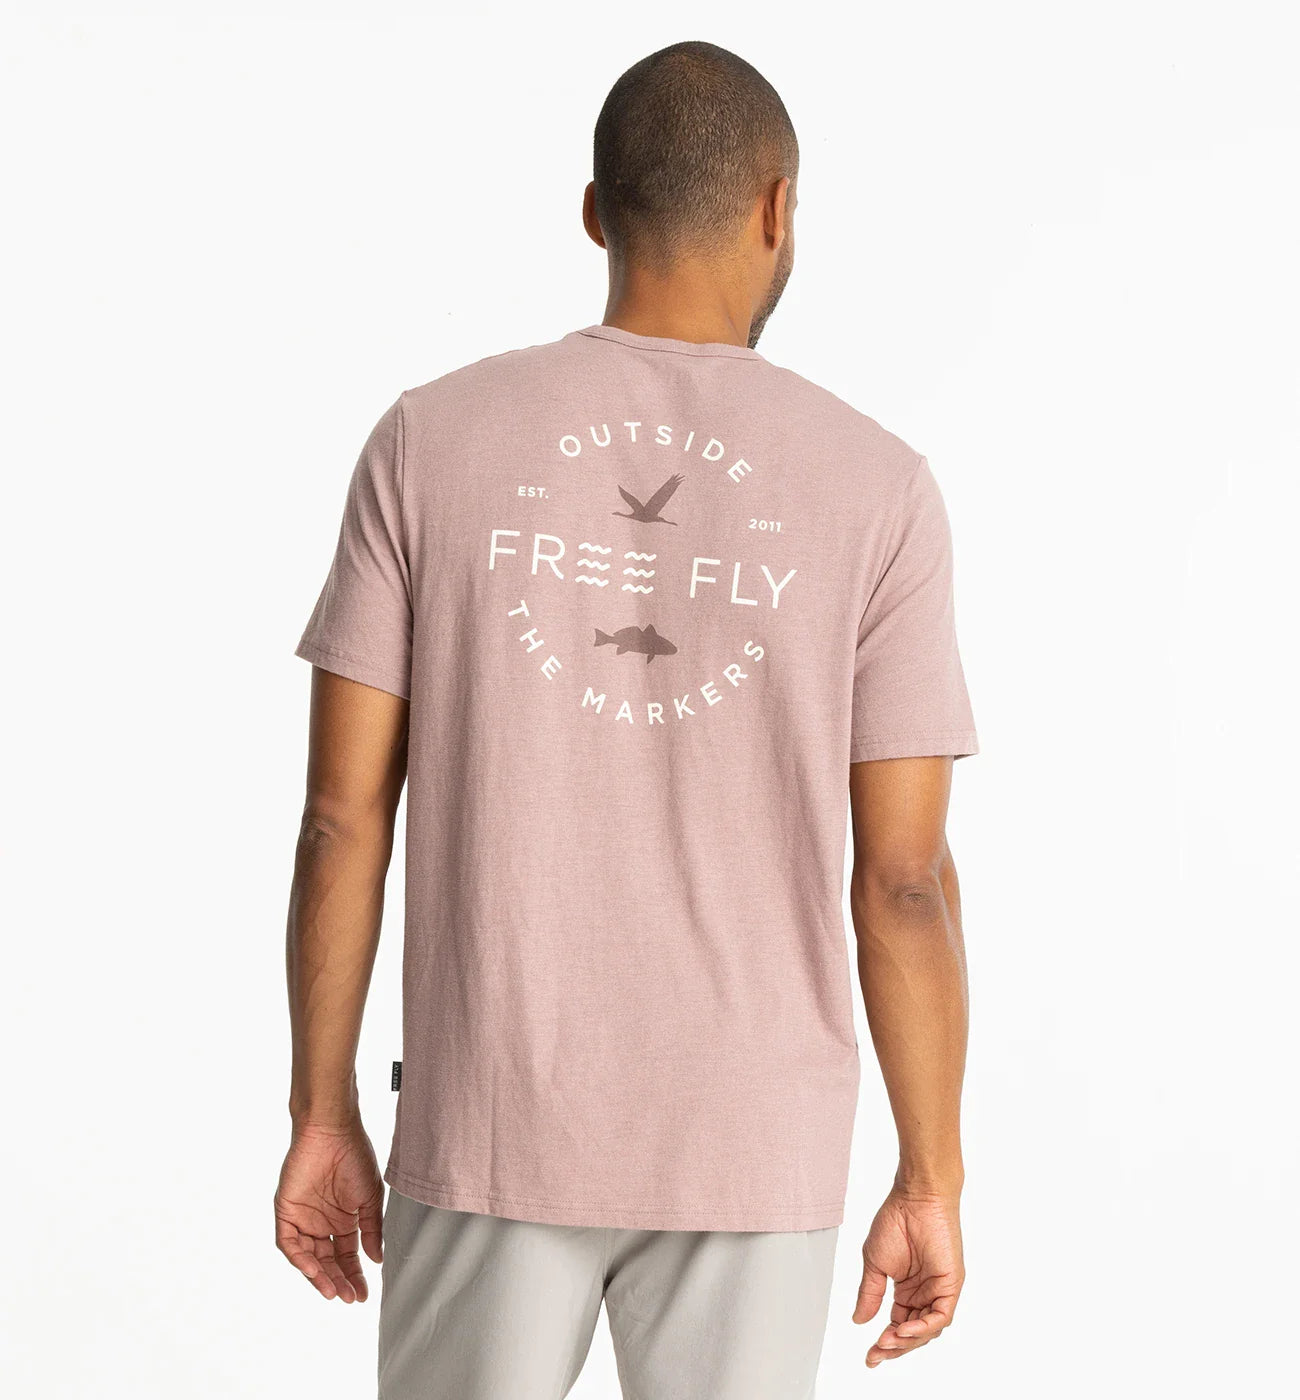 Mens Tagged Men's Free Fly Apparel - Southern Sol